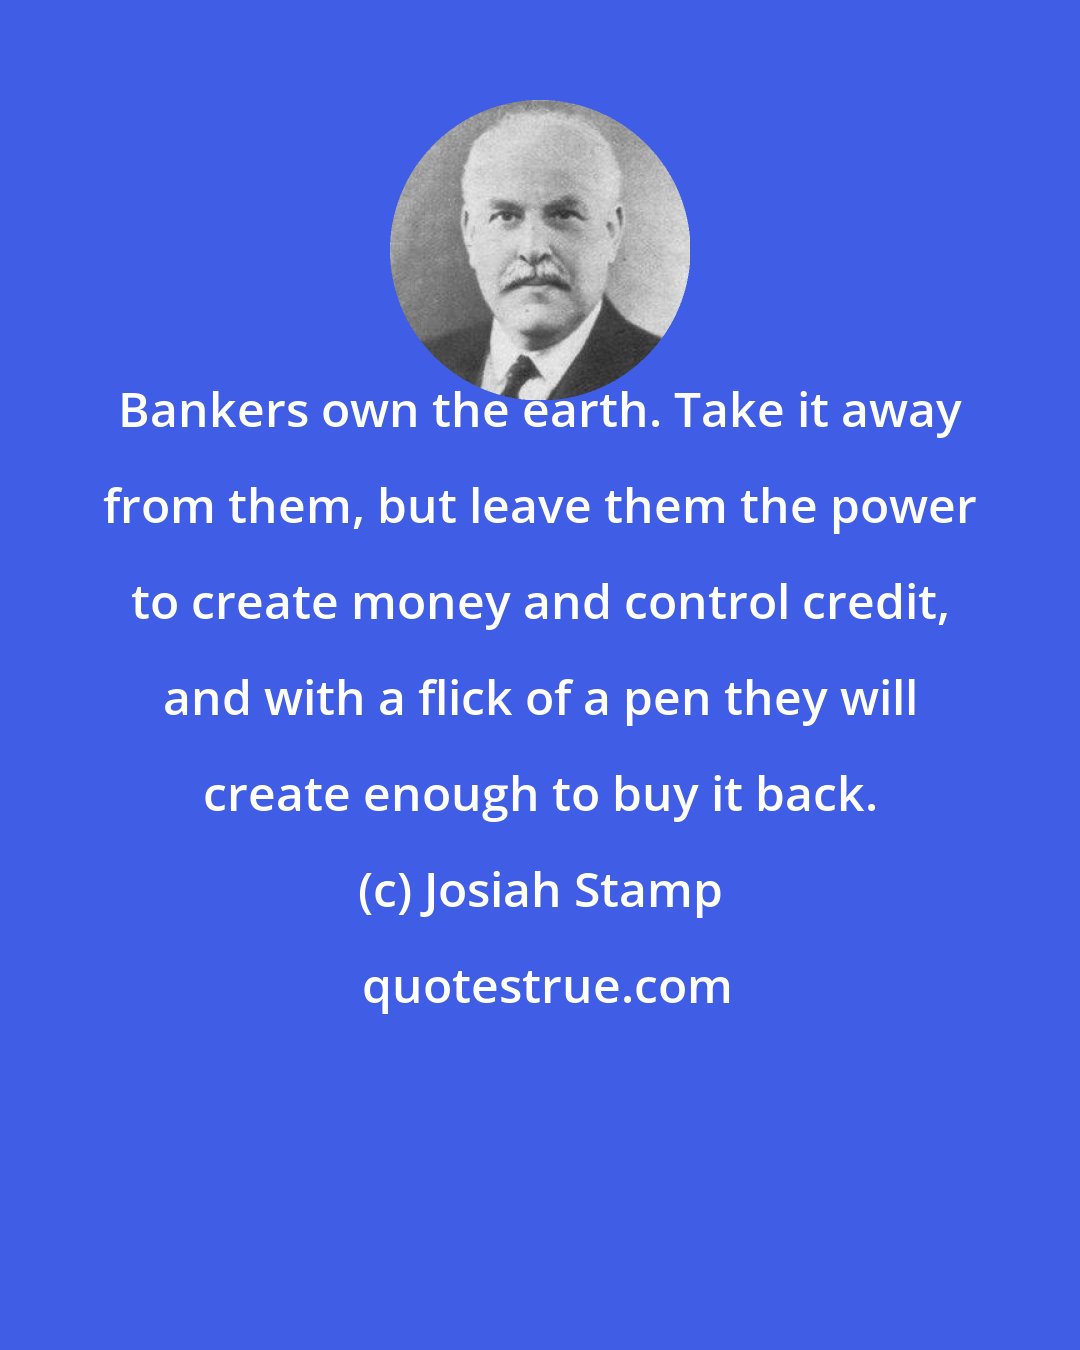 Josiah Stamp: Bankers own the earth. Take it away from them, but leave them the power to create money and control credit, and with a flick of a pen they will create enough to buy it back.